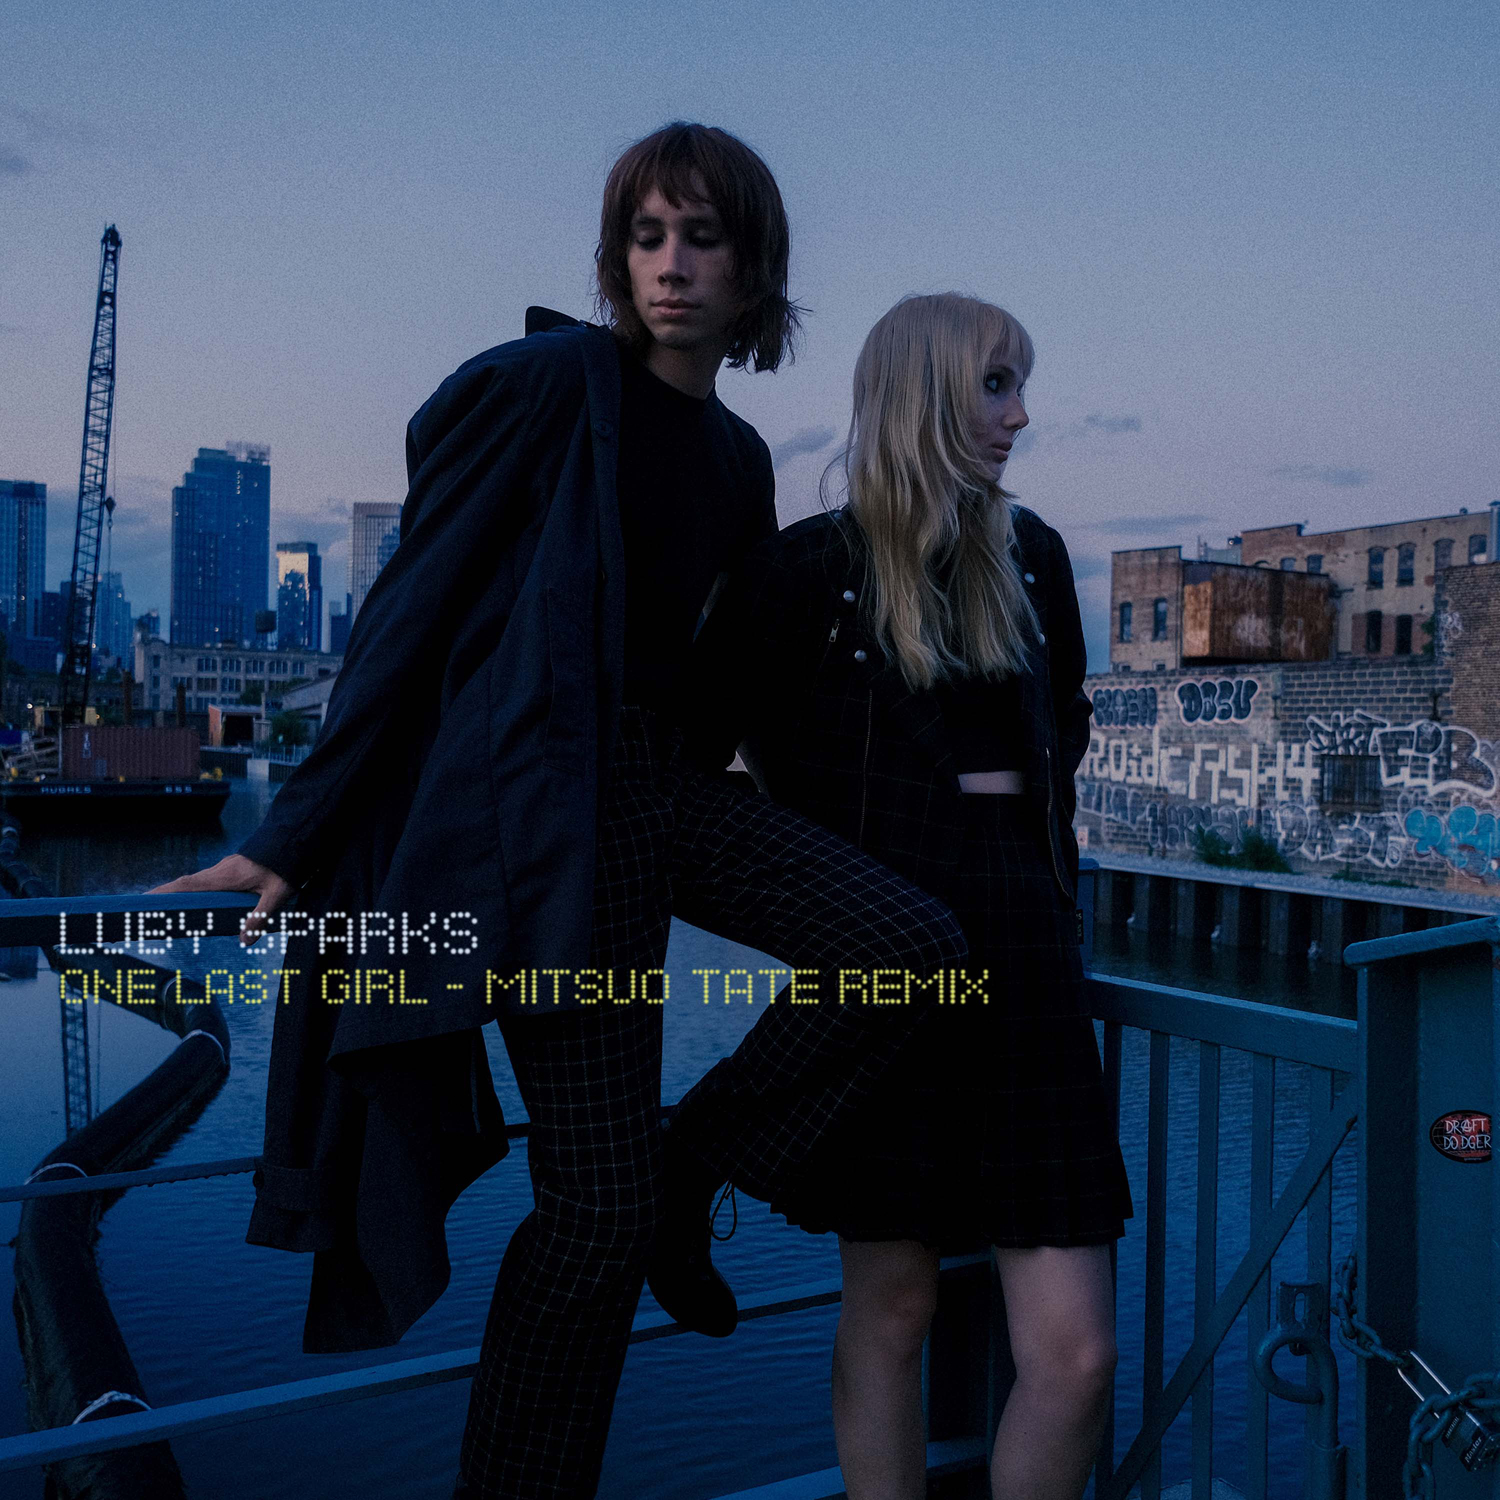 Luby Sparksが「One Last Girl」のMitsuo Tateリミックスをリリース 